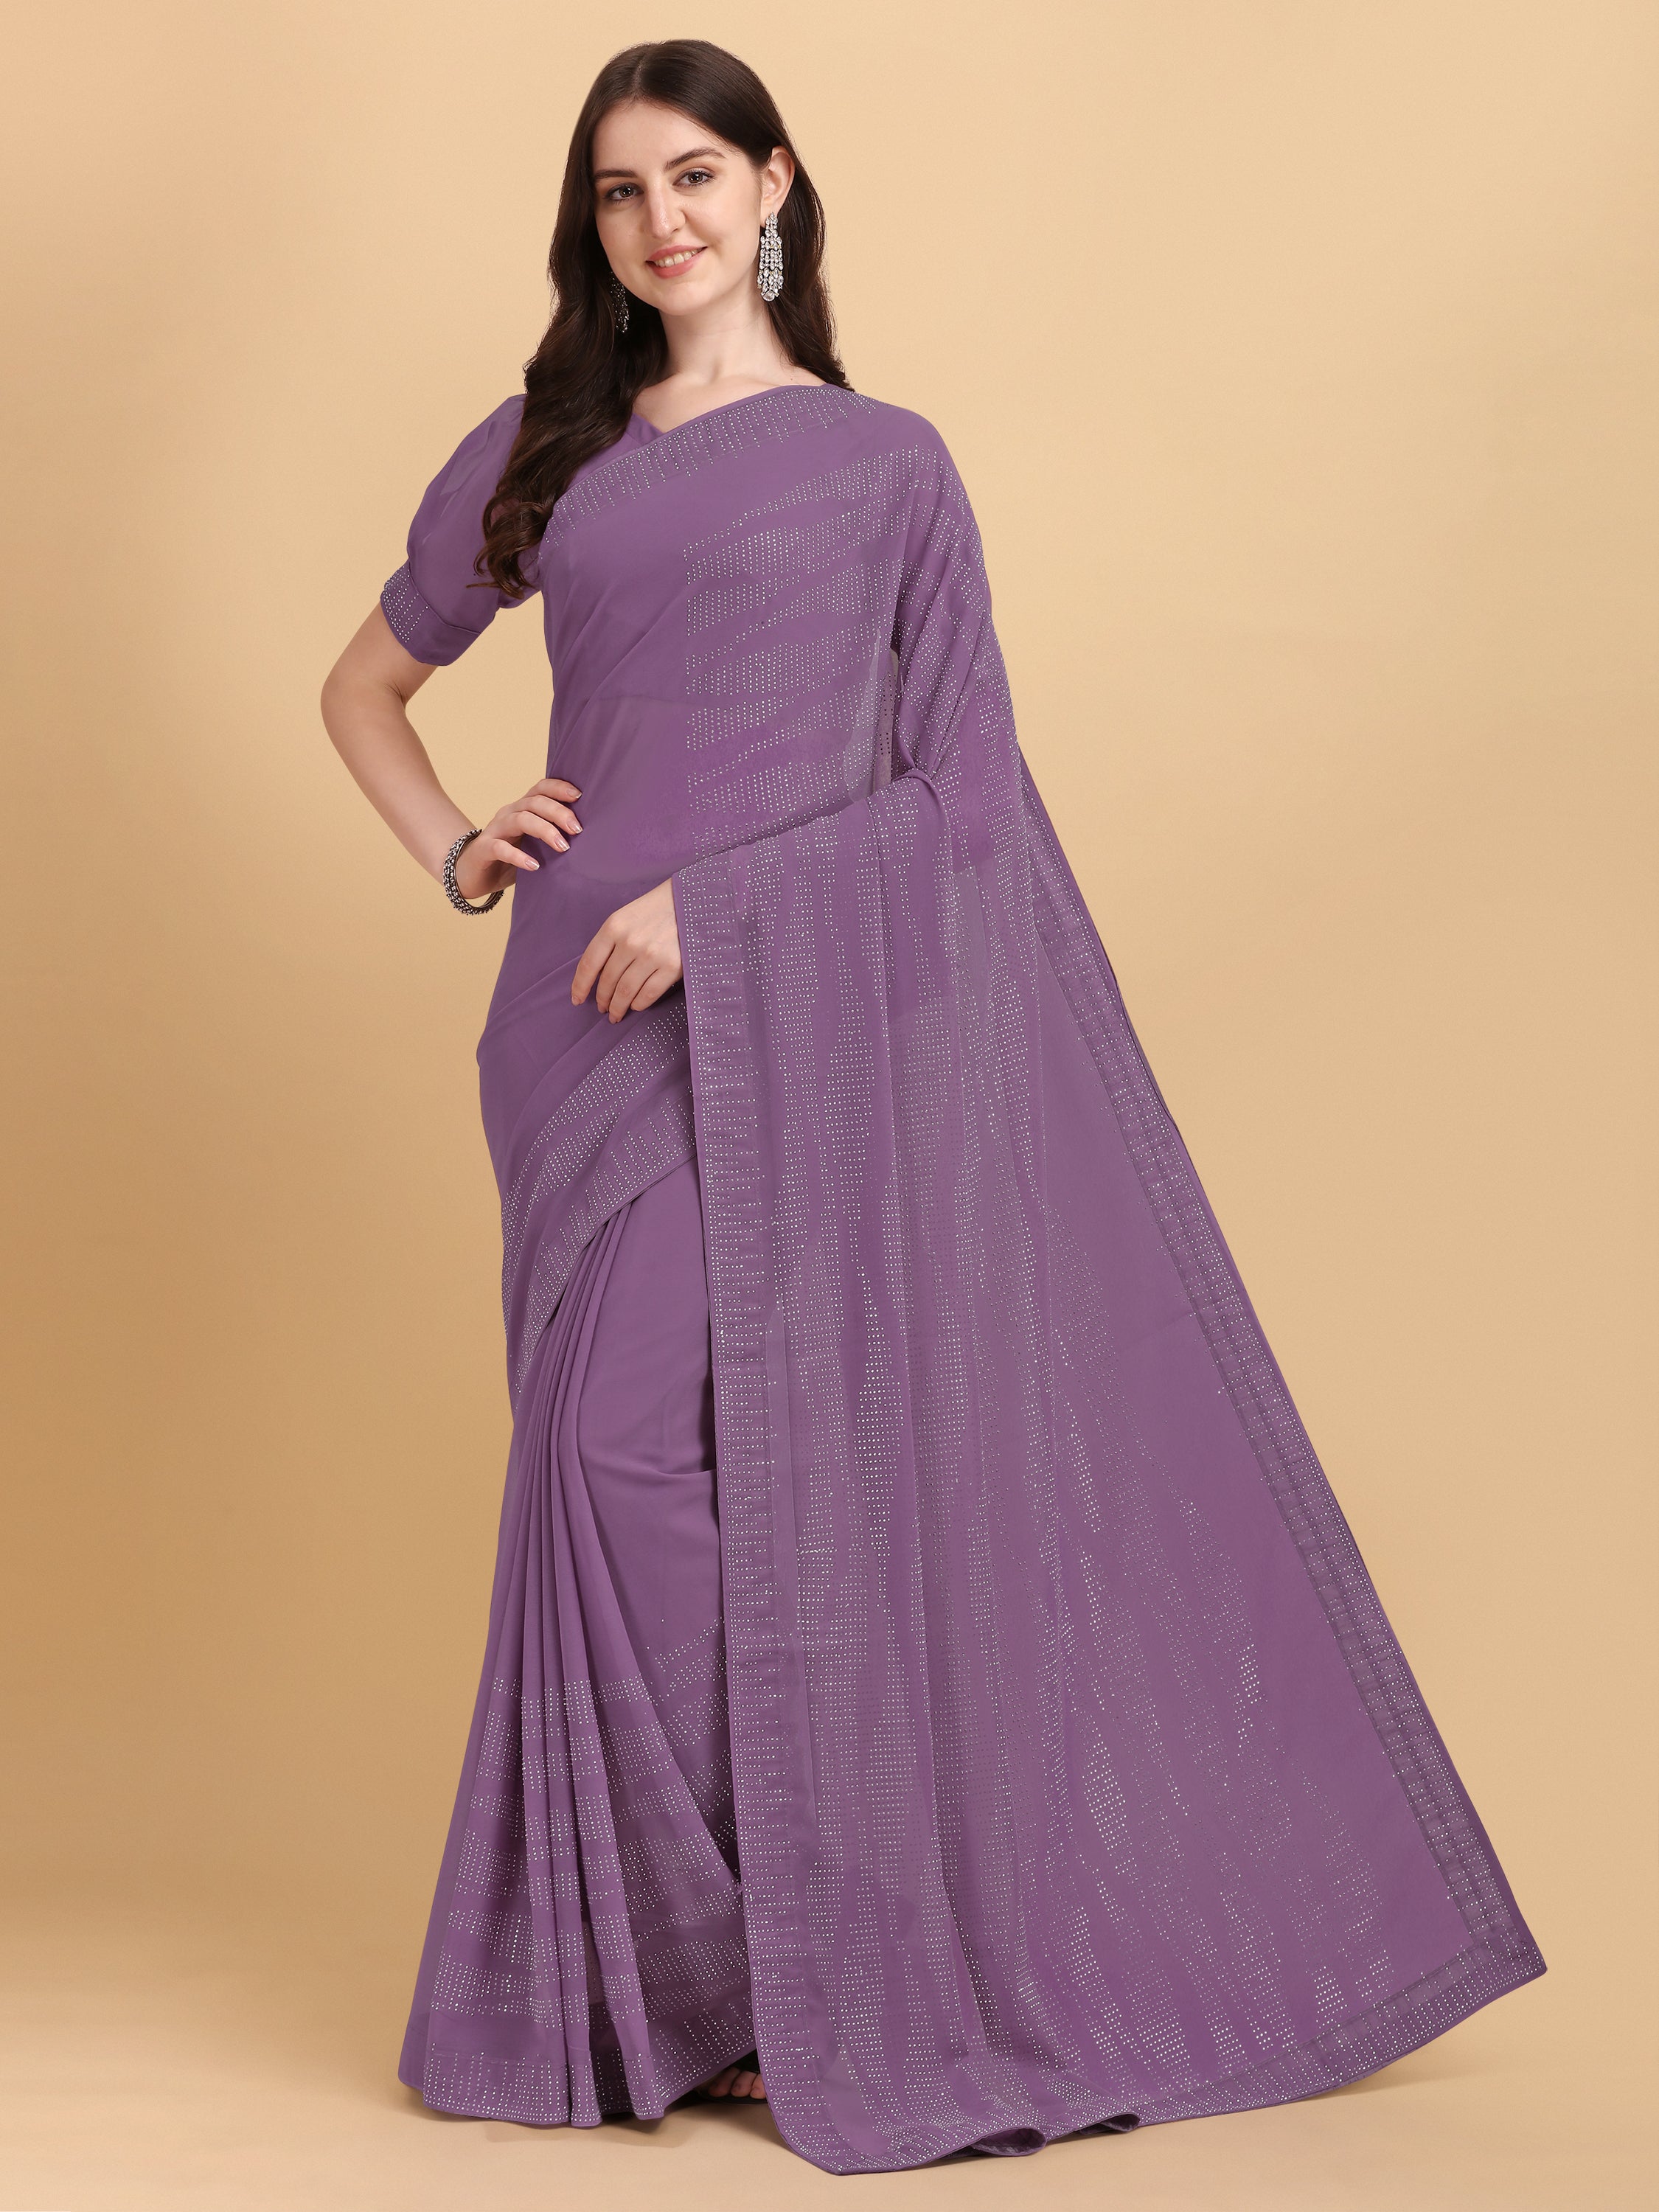 Women's Emblishment Occasion Wear Georgette Saree With Blouse Piece (Violet) - NIMIDHYA